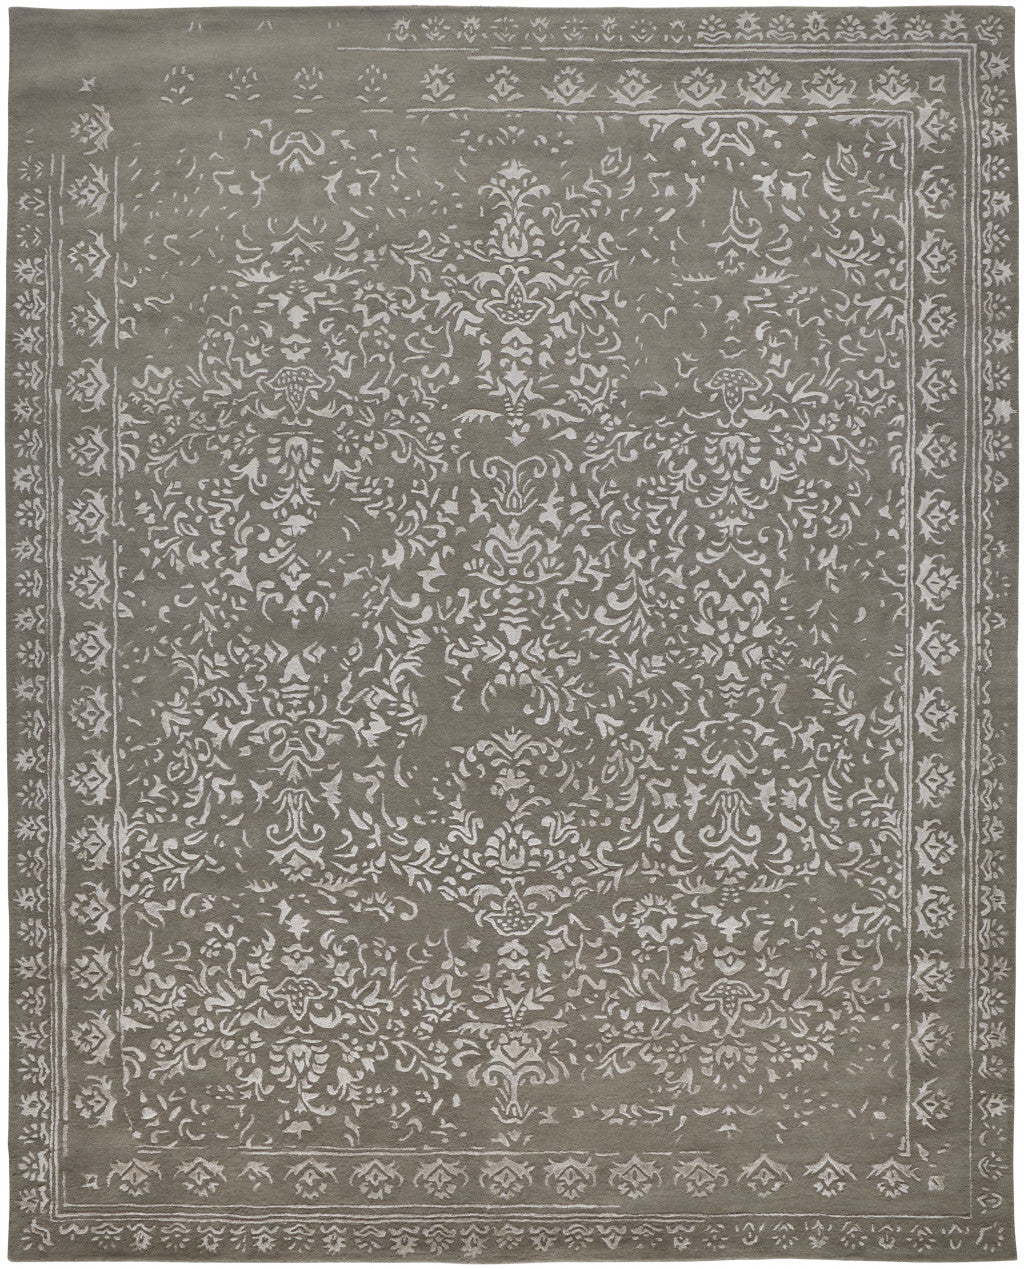 Blue And Silver Wool Floral Tufted Handmade Distressed Area Rug - 5' x 8'